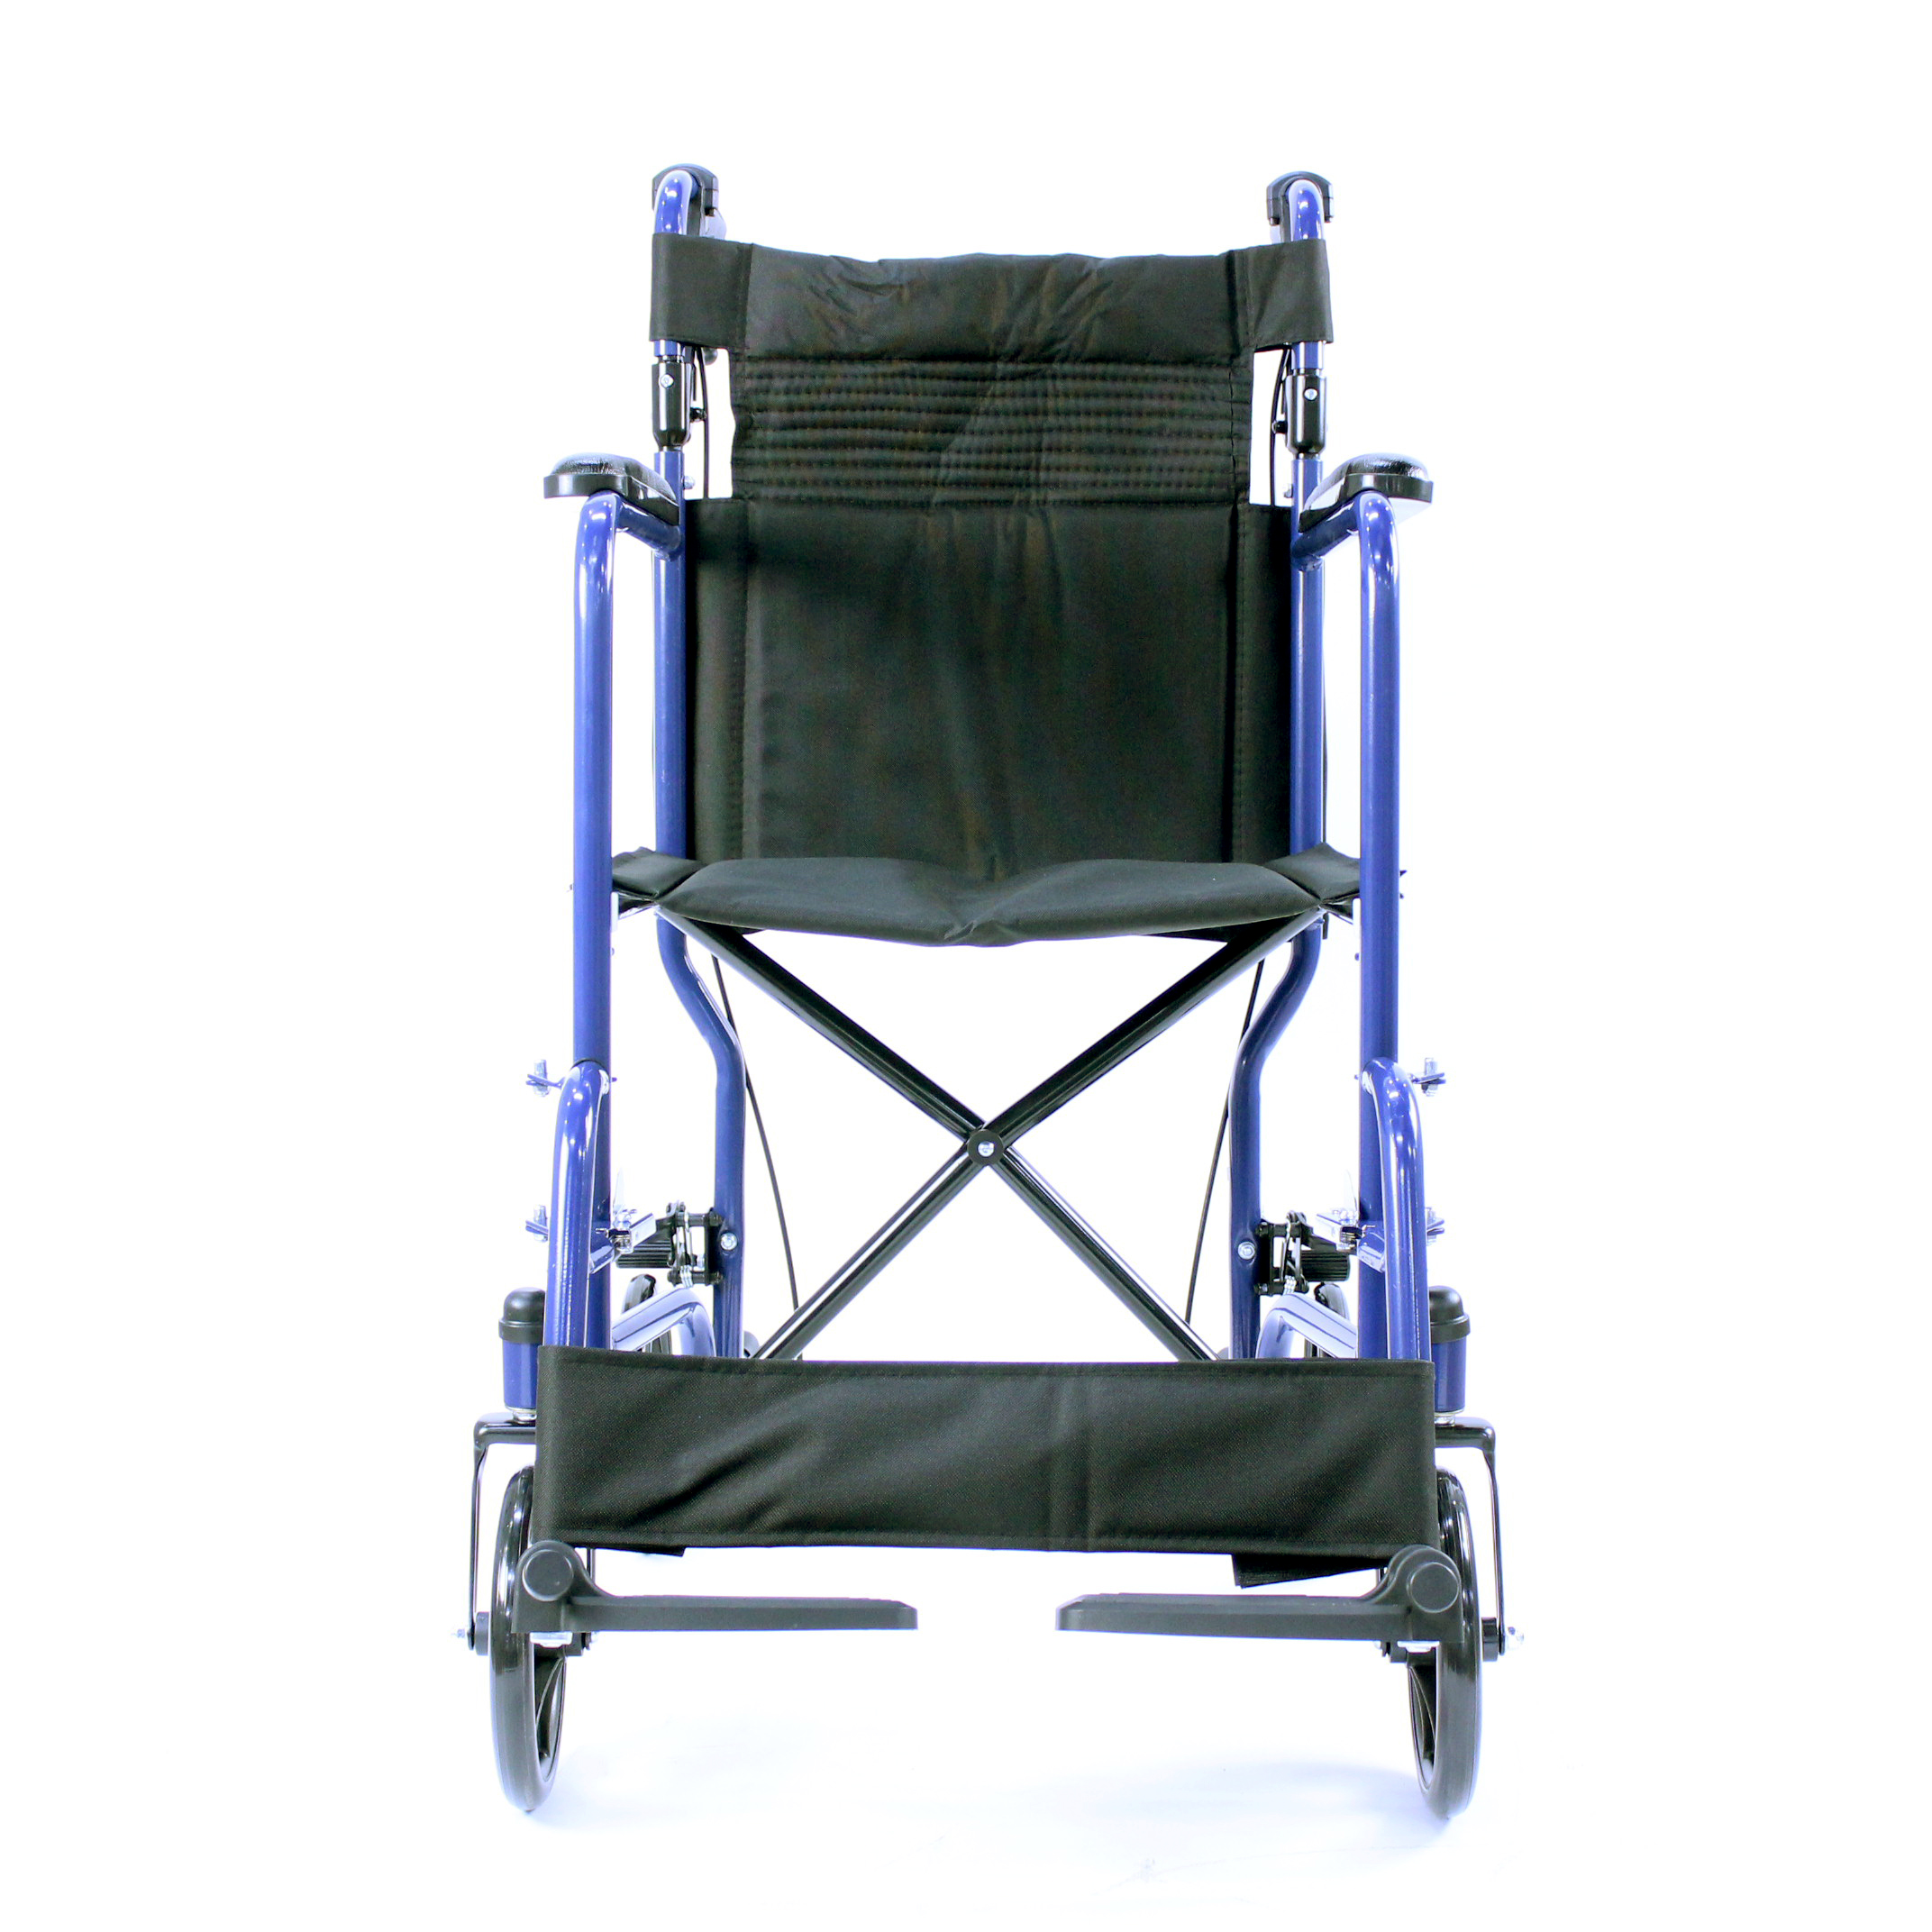 physical therapy equipment Factory Manufacturer quality lightweight manual wheelchair for disabled